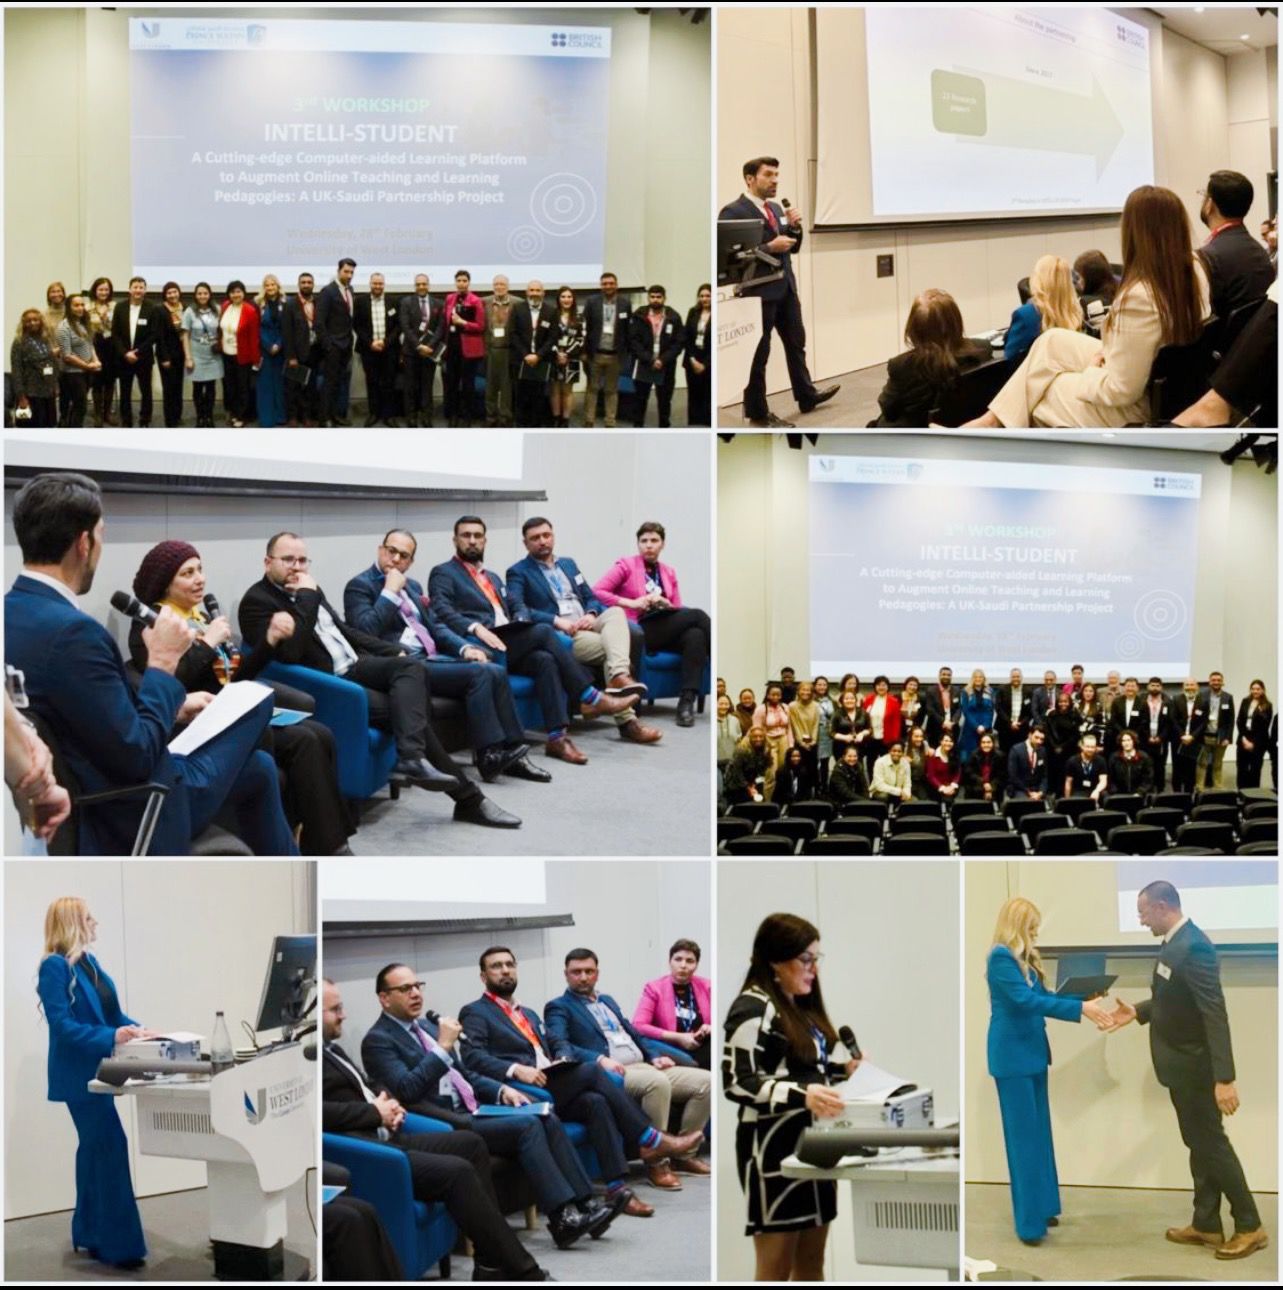 Prince Sultan University's SSEL Shines at 3rd Intelli-Student Workshop in the UK: Pioneering Cutting-Edge Technology for Transformative Pedagogies